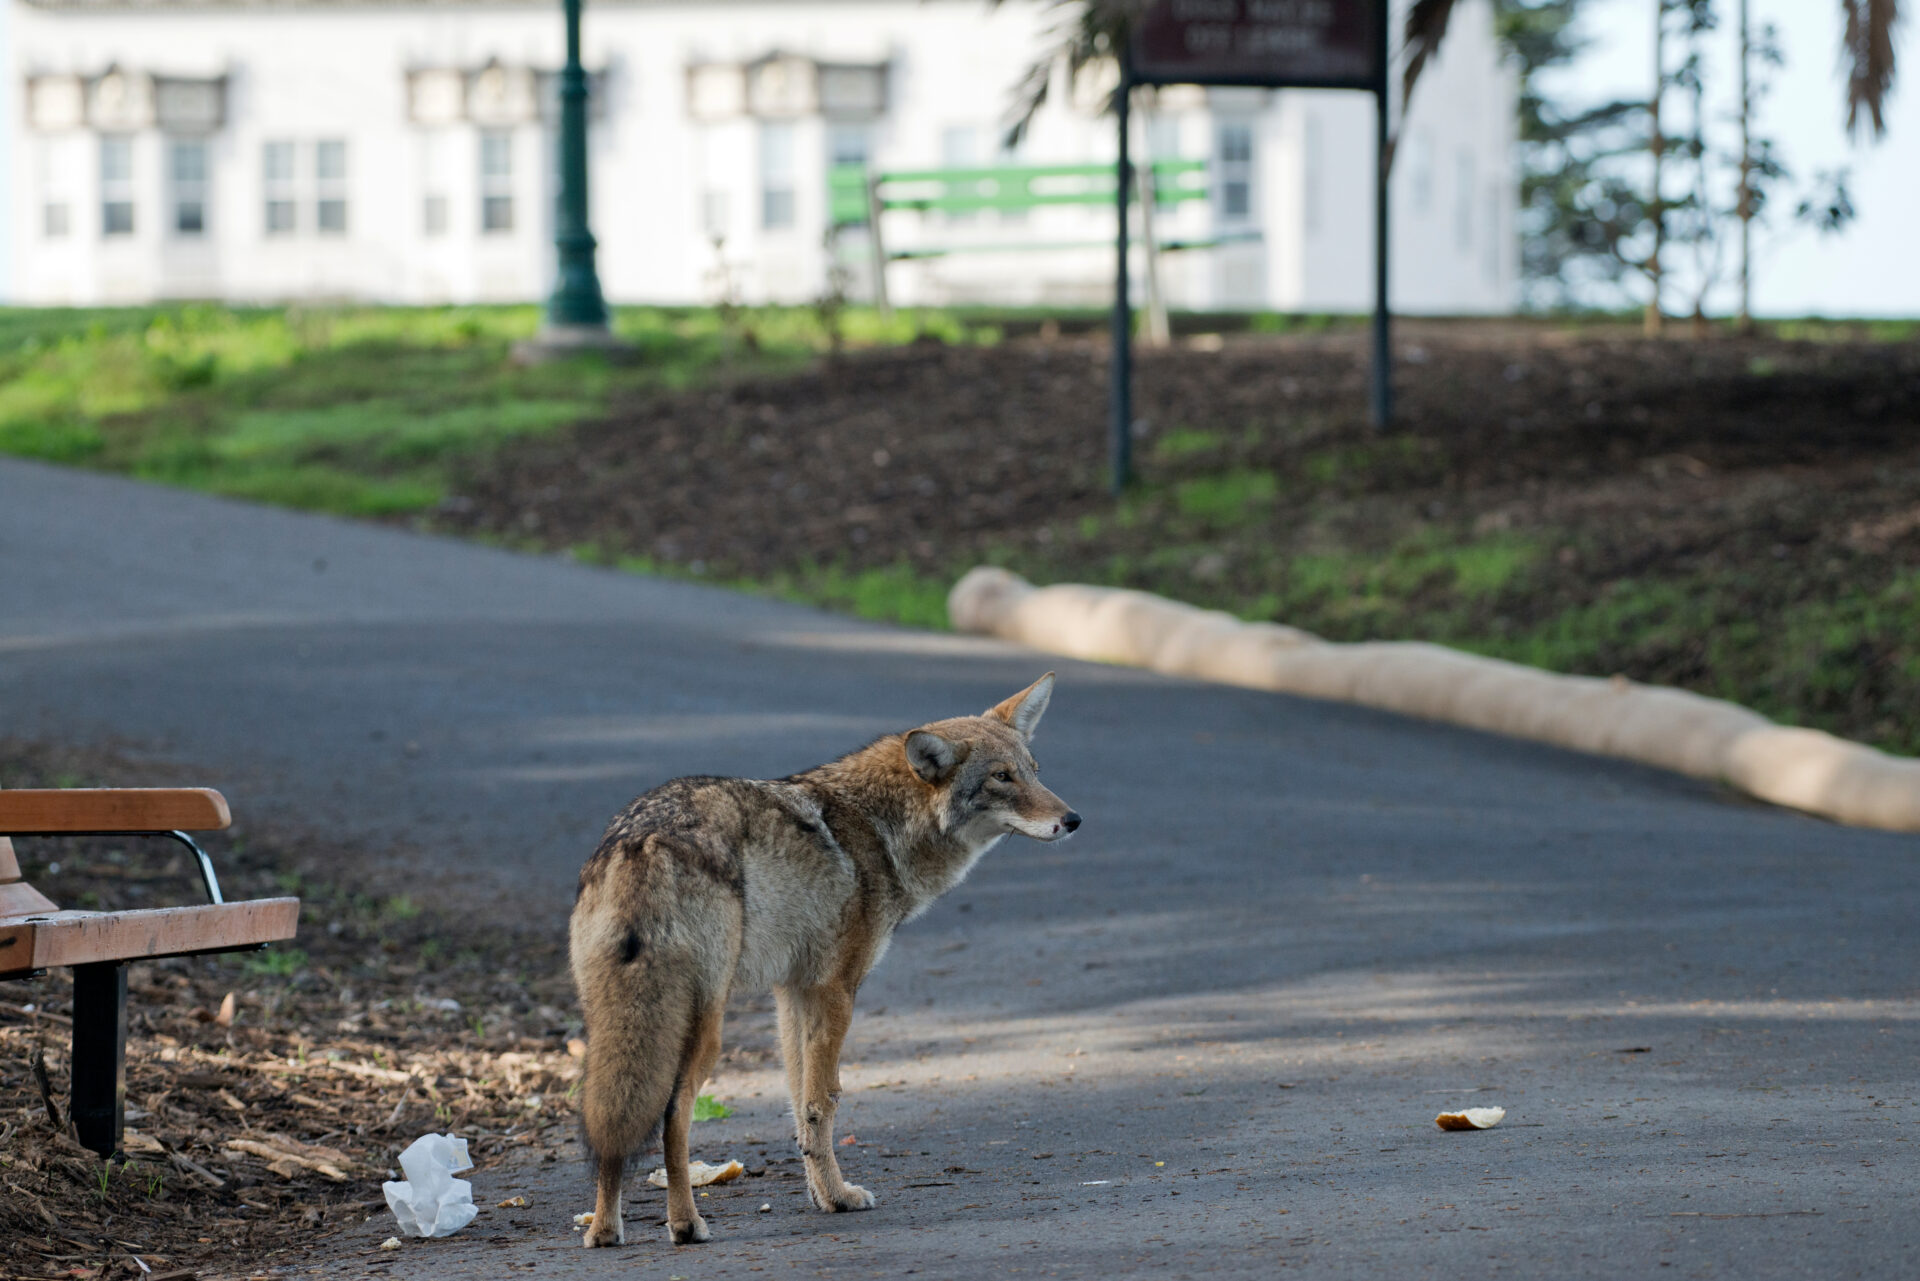 image of a coyote in Connecticut city.